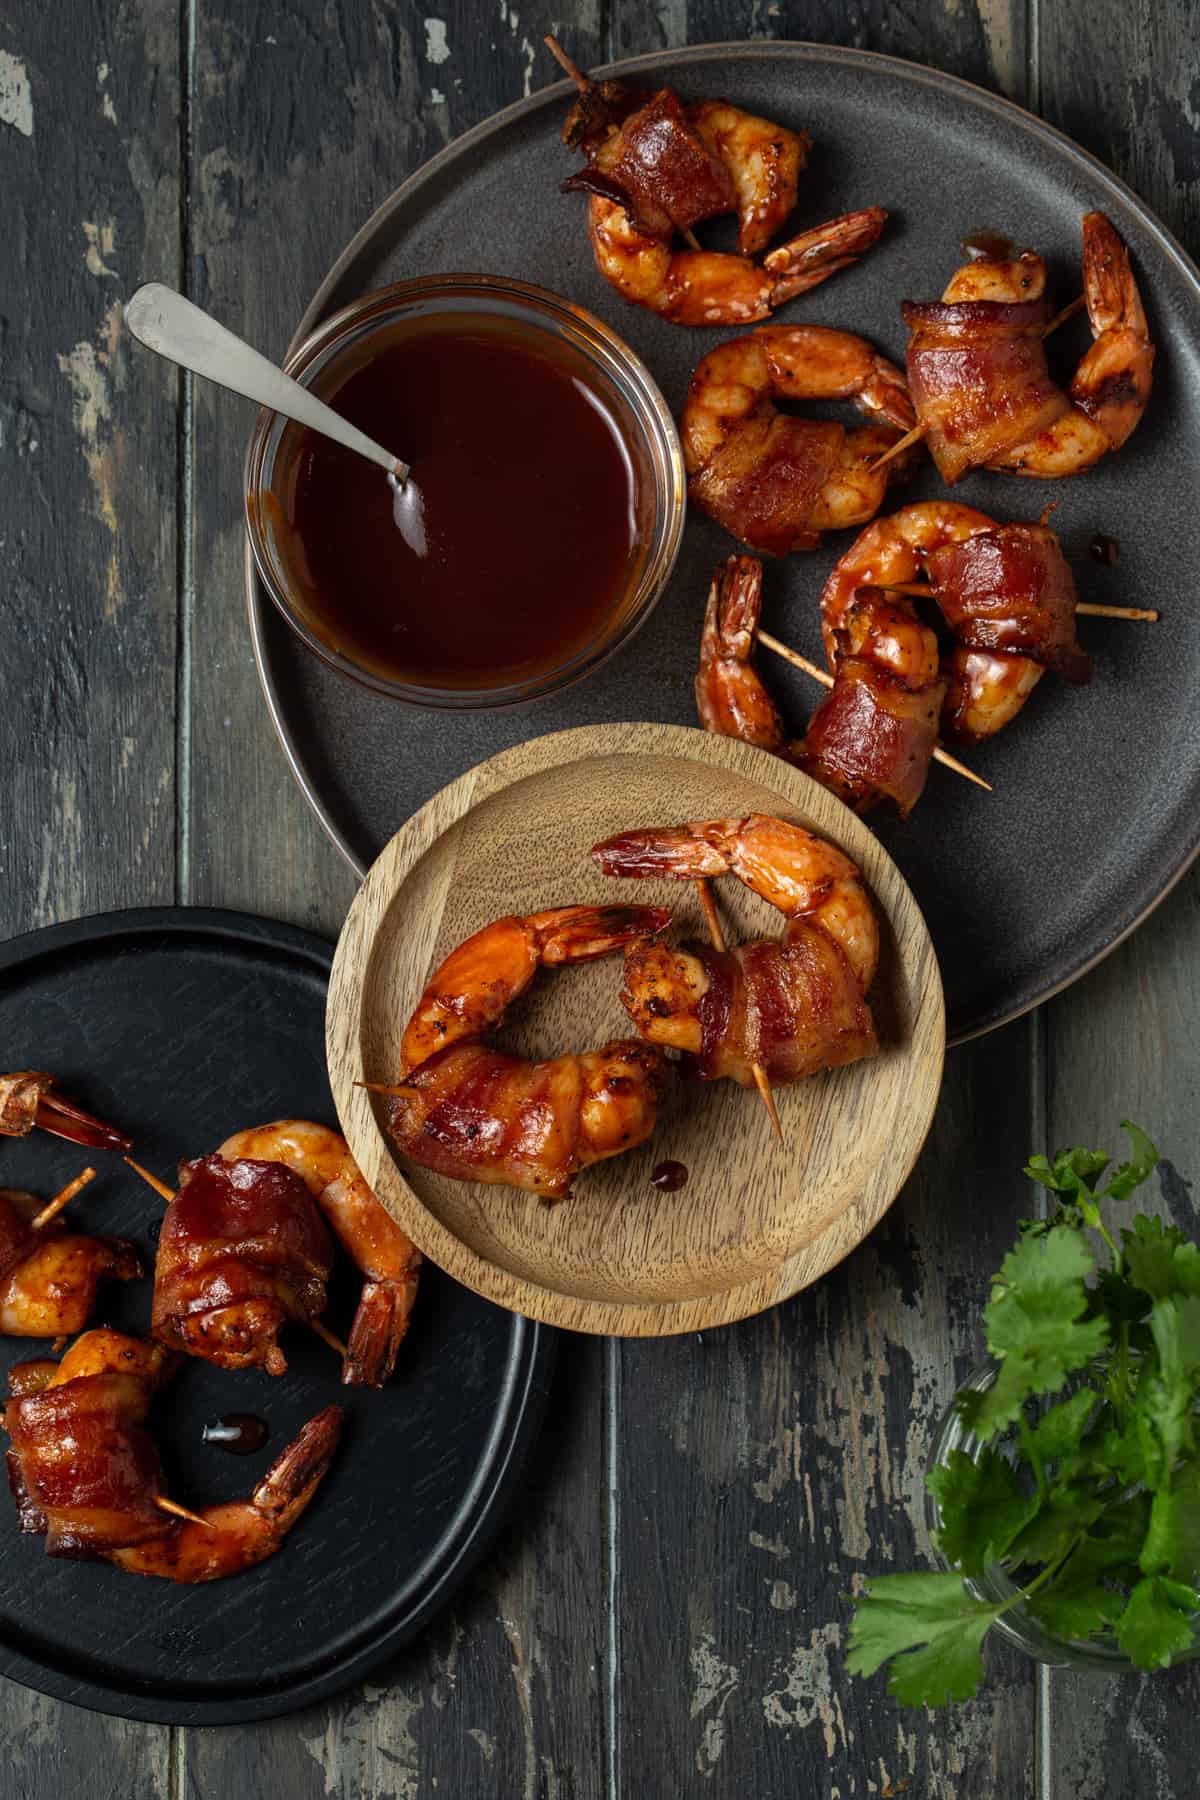 three plates filled with shrimp with a bowl of barbecue sauce and cilantro for garnish.